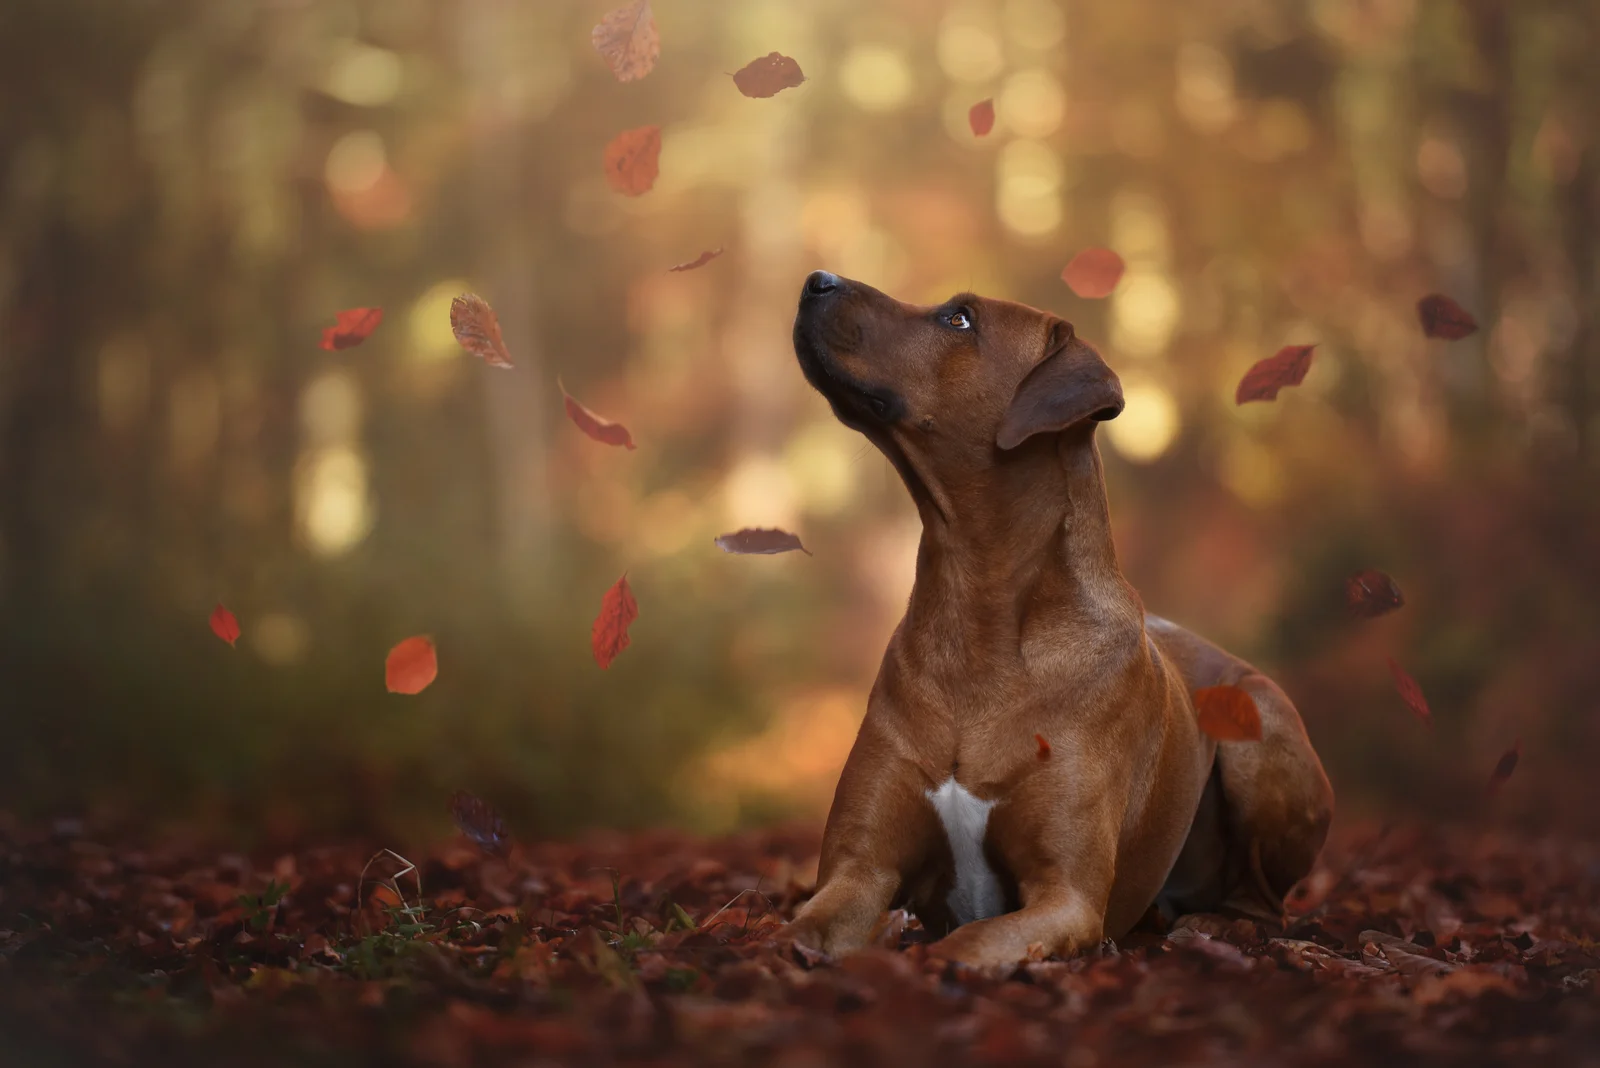 Rhodesian Ridgeback sitting in woods with leaves falling from trees